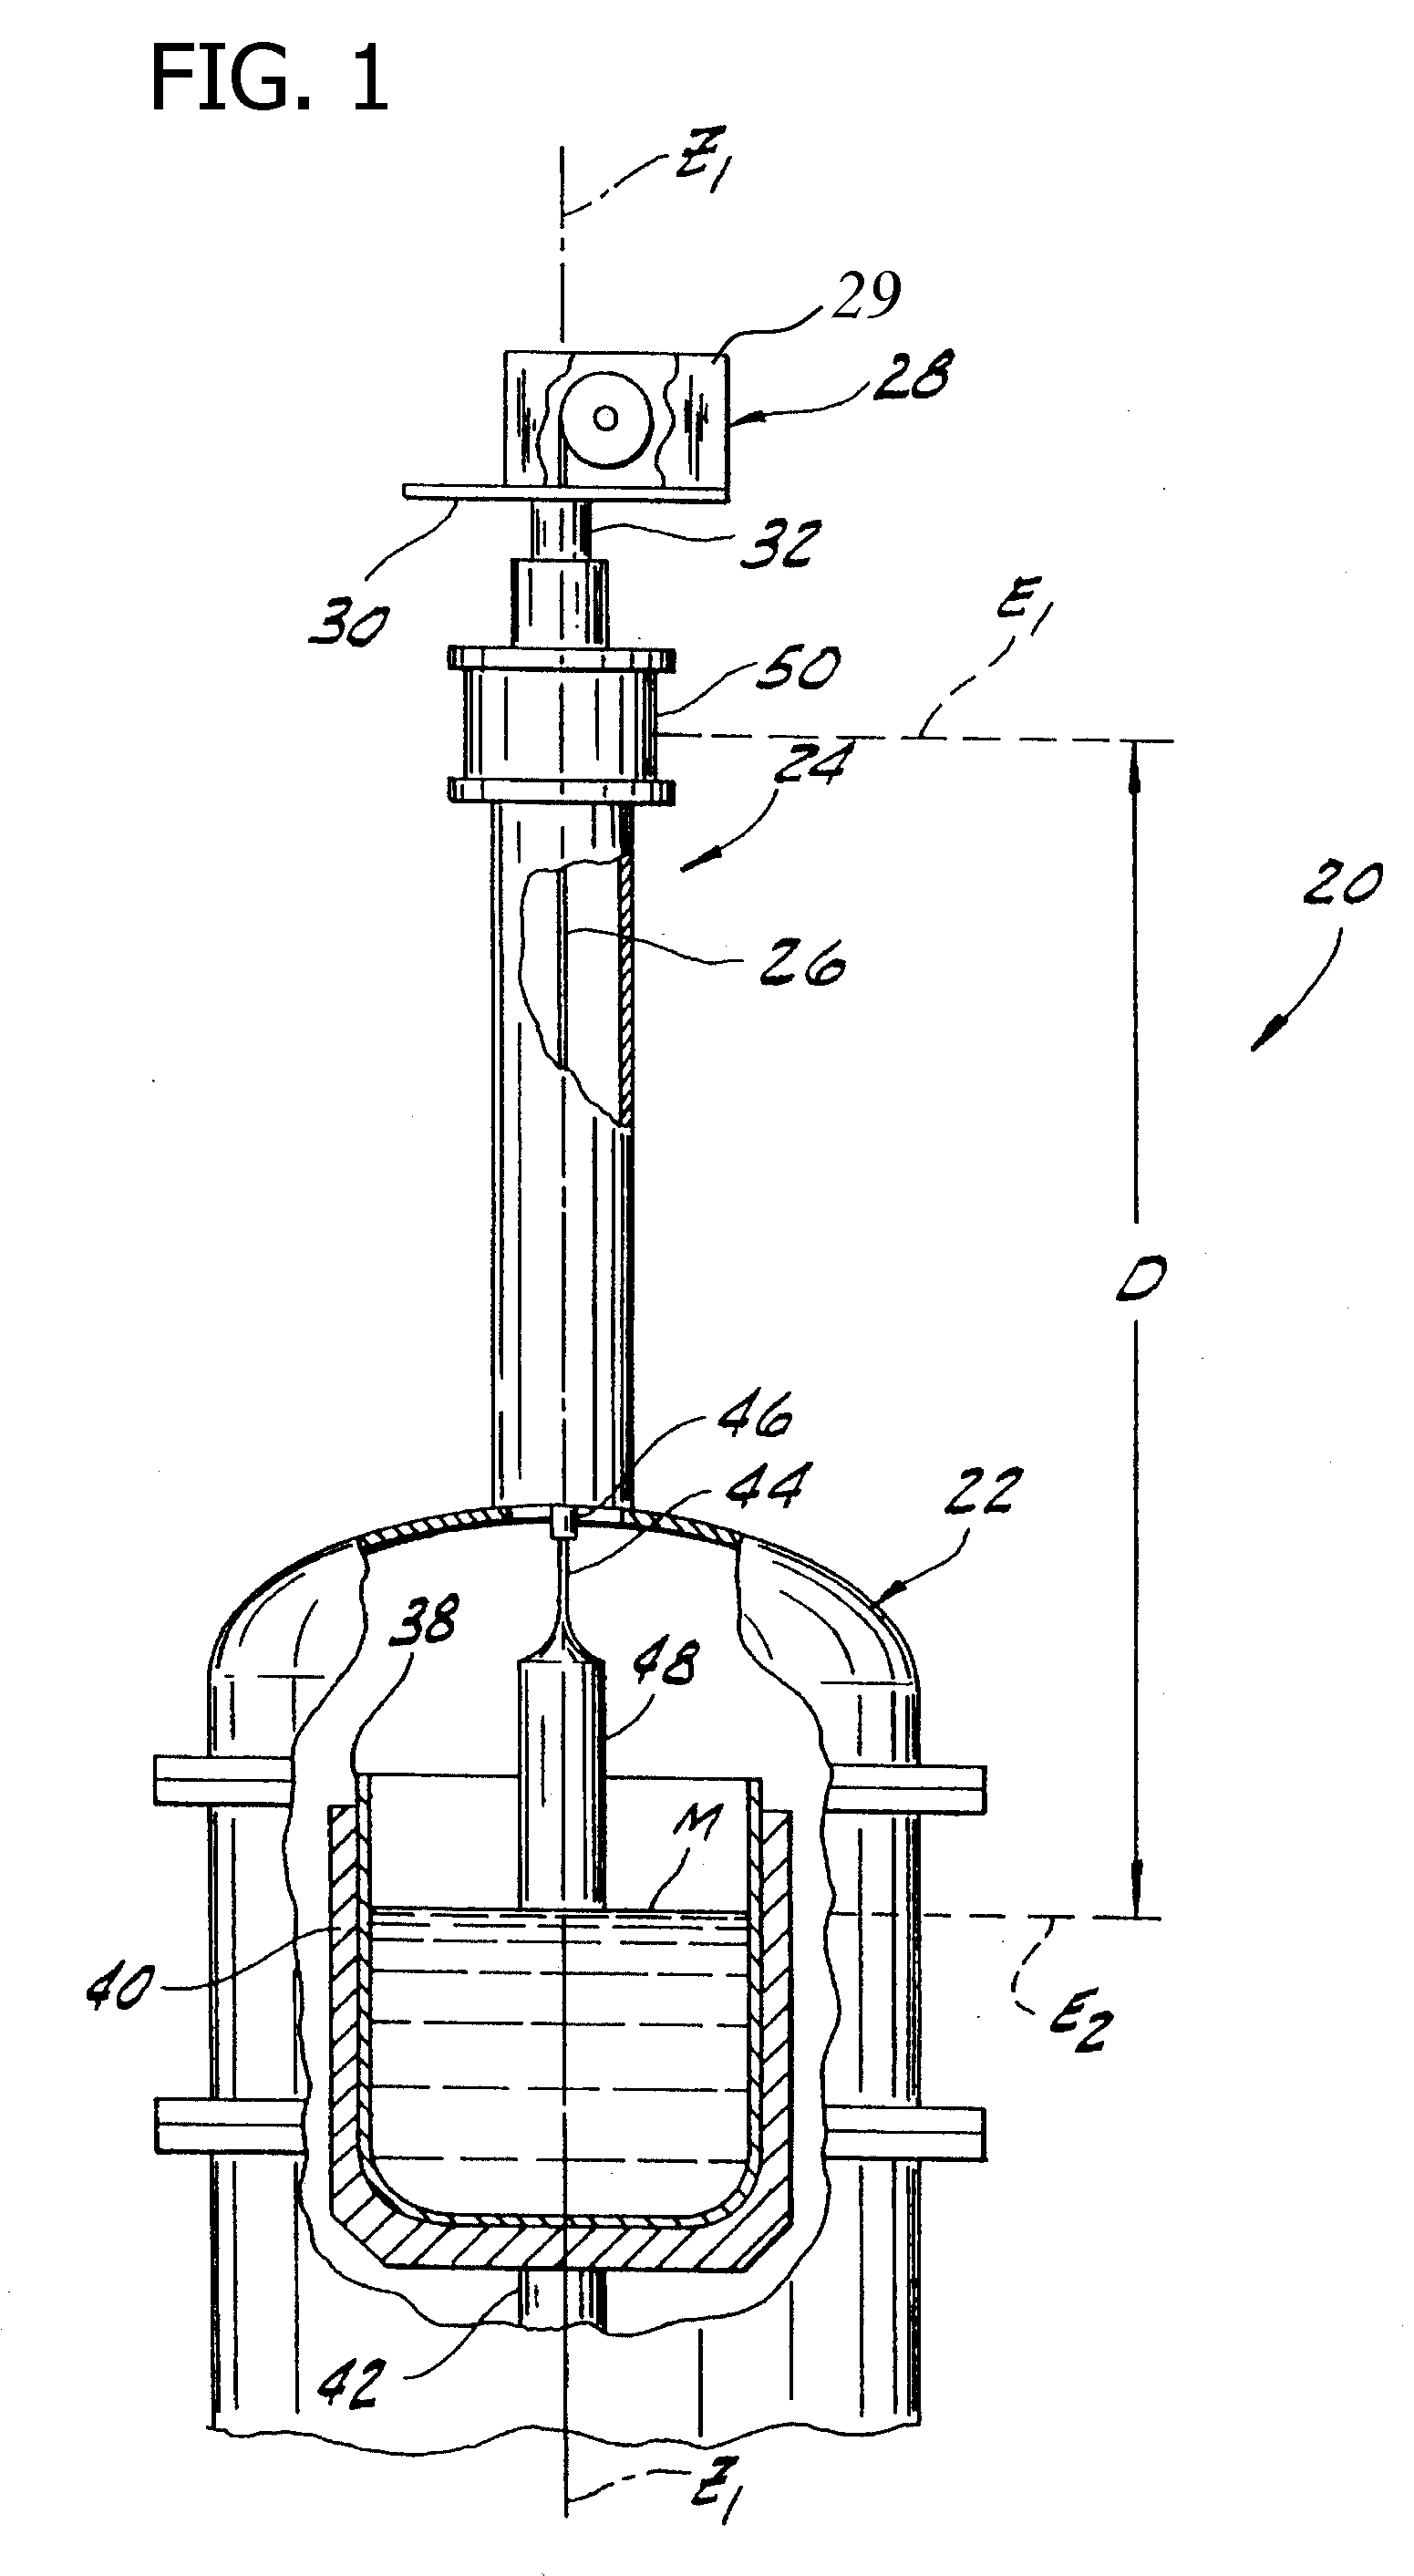 Systems for weighing a pulled object having a changing weight